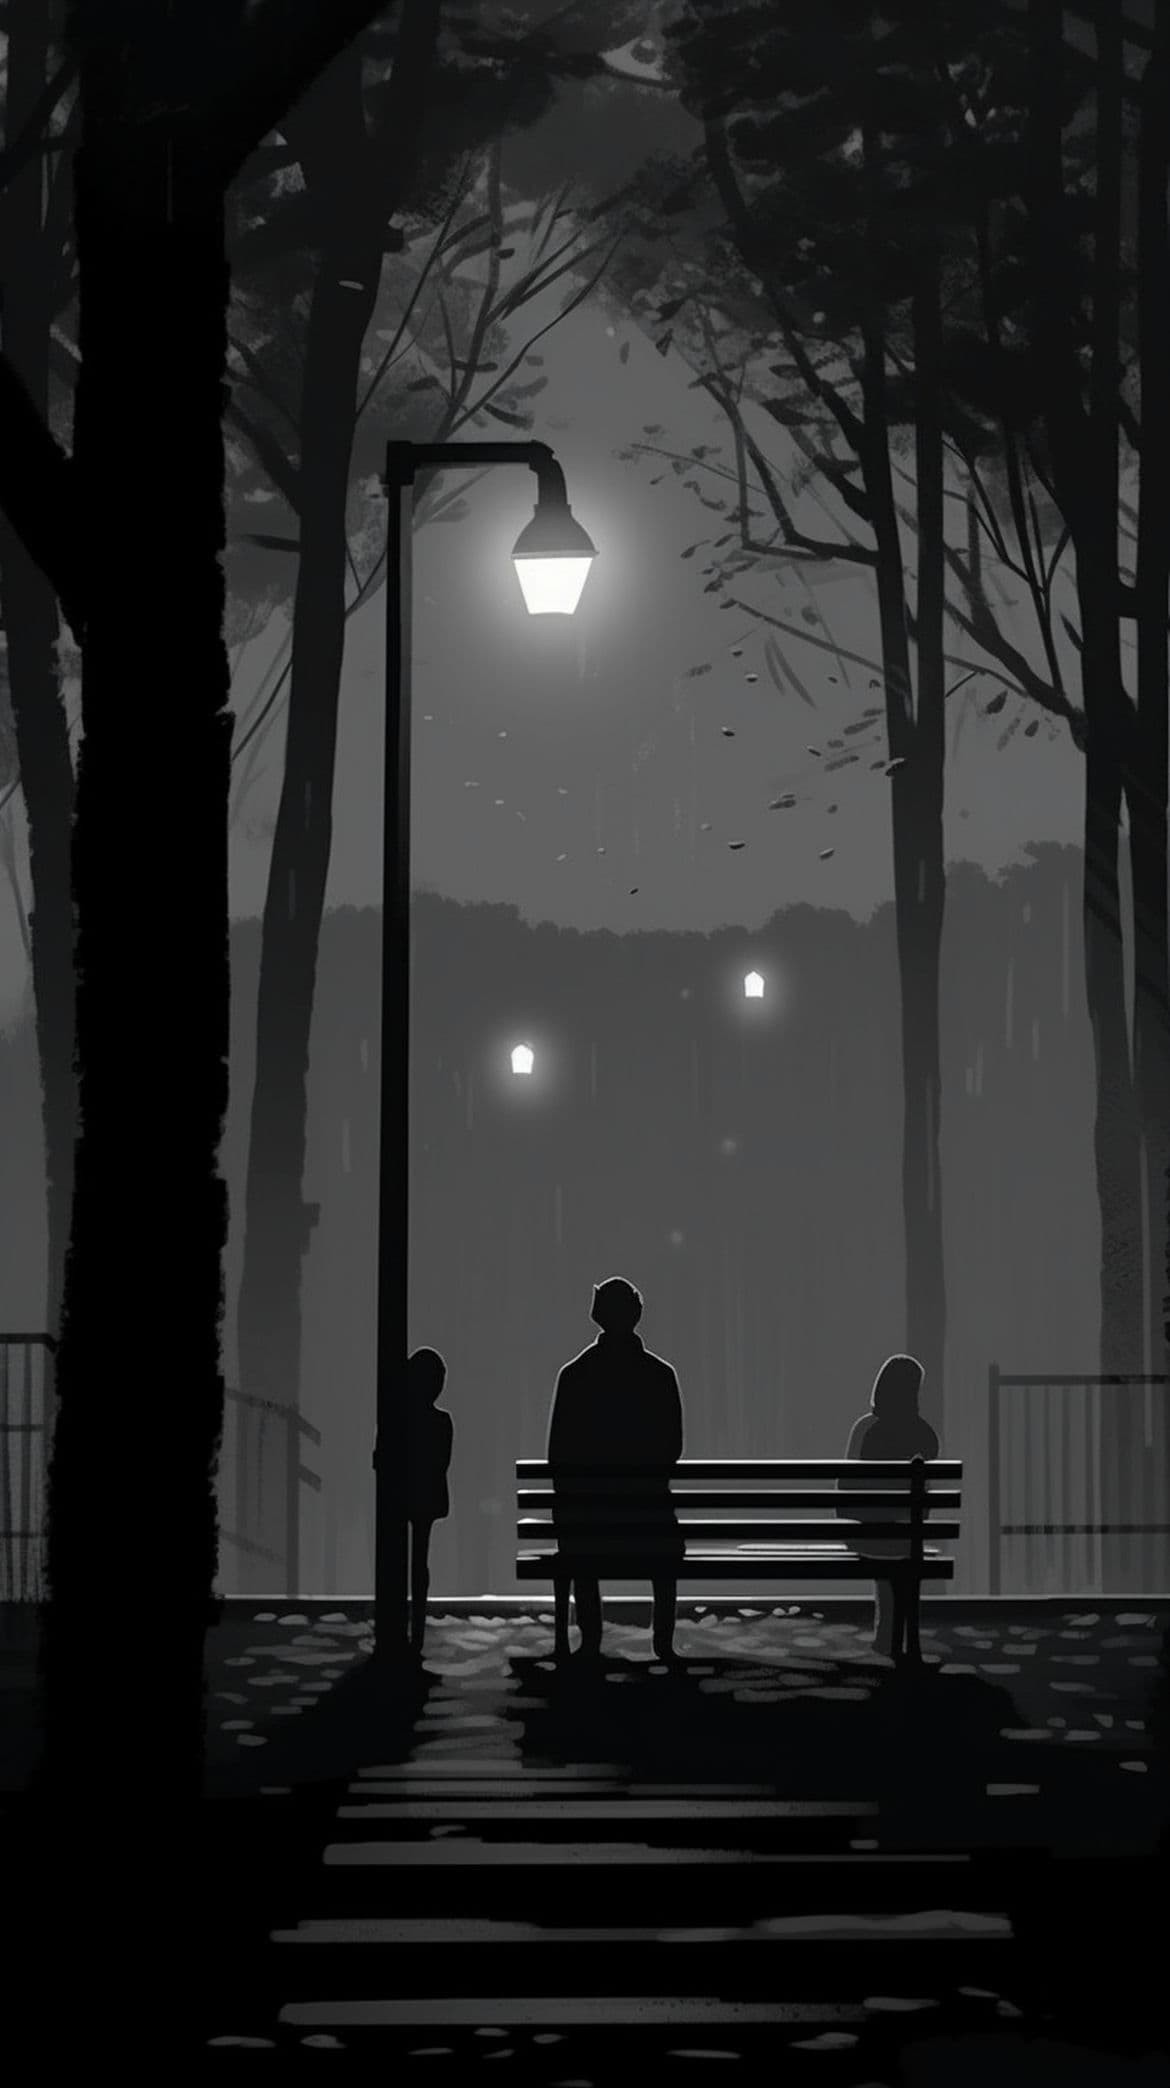 The picture shows a man sitting on a bench in a park at night. The picture is in black and white, and the park is surrounded by trees. - Black, black phone